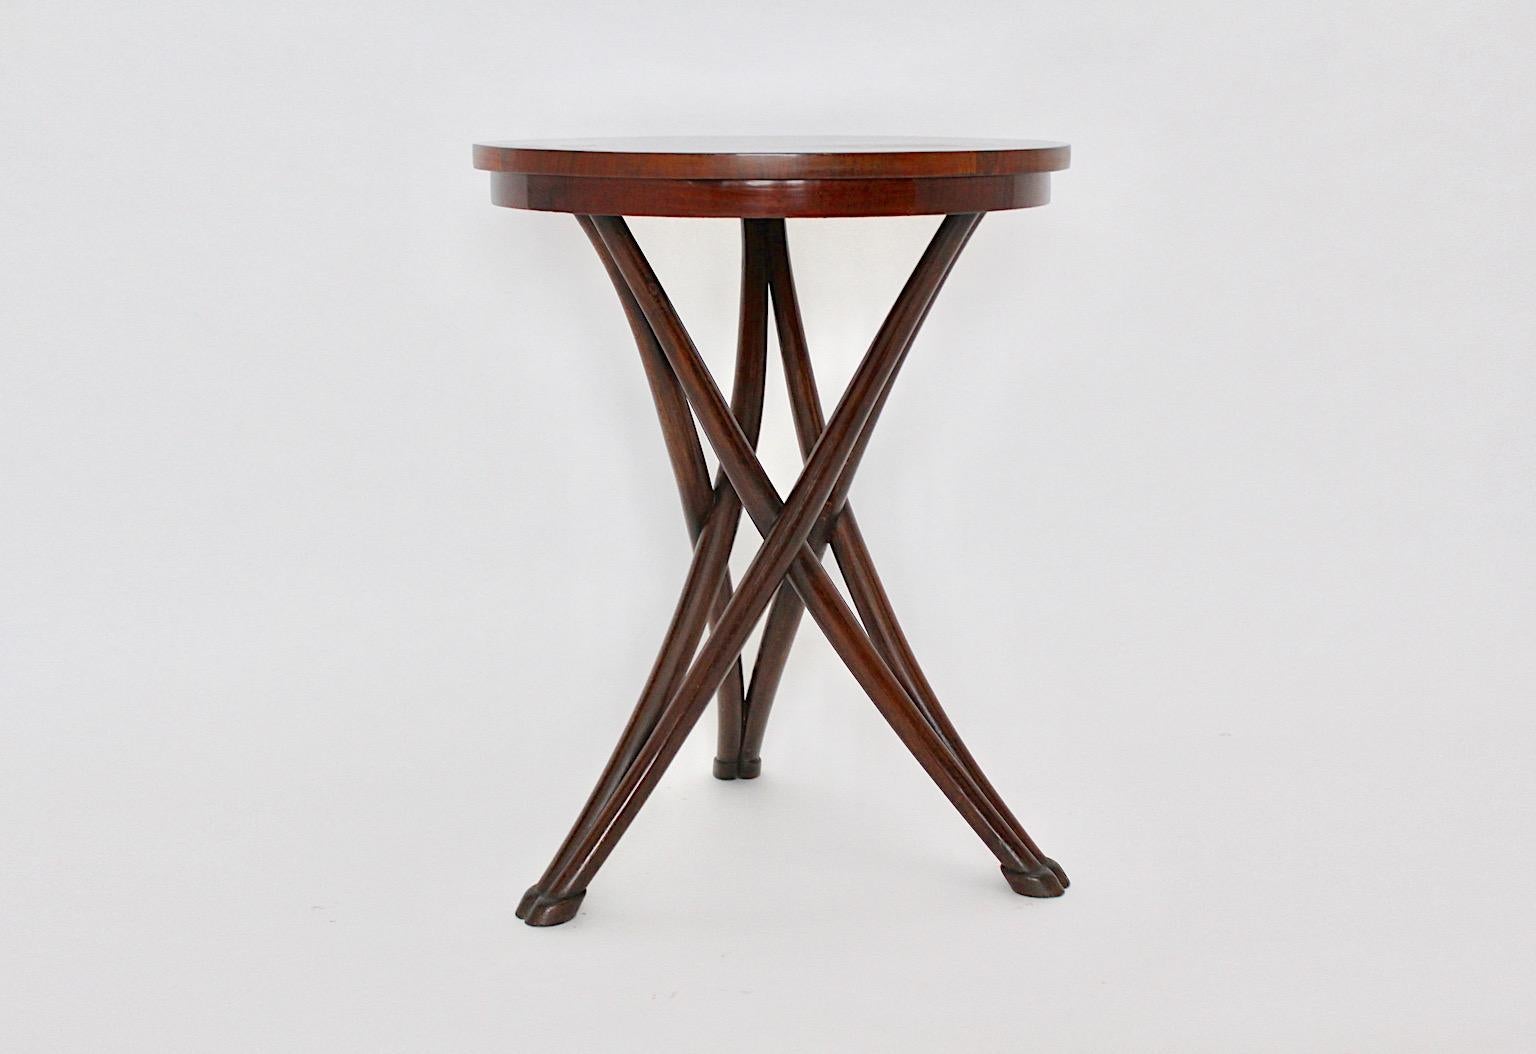 Stained Historicism Beech Bentwood Side Table No 13 by August Thonet circa 1880 Vienna For Sale